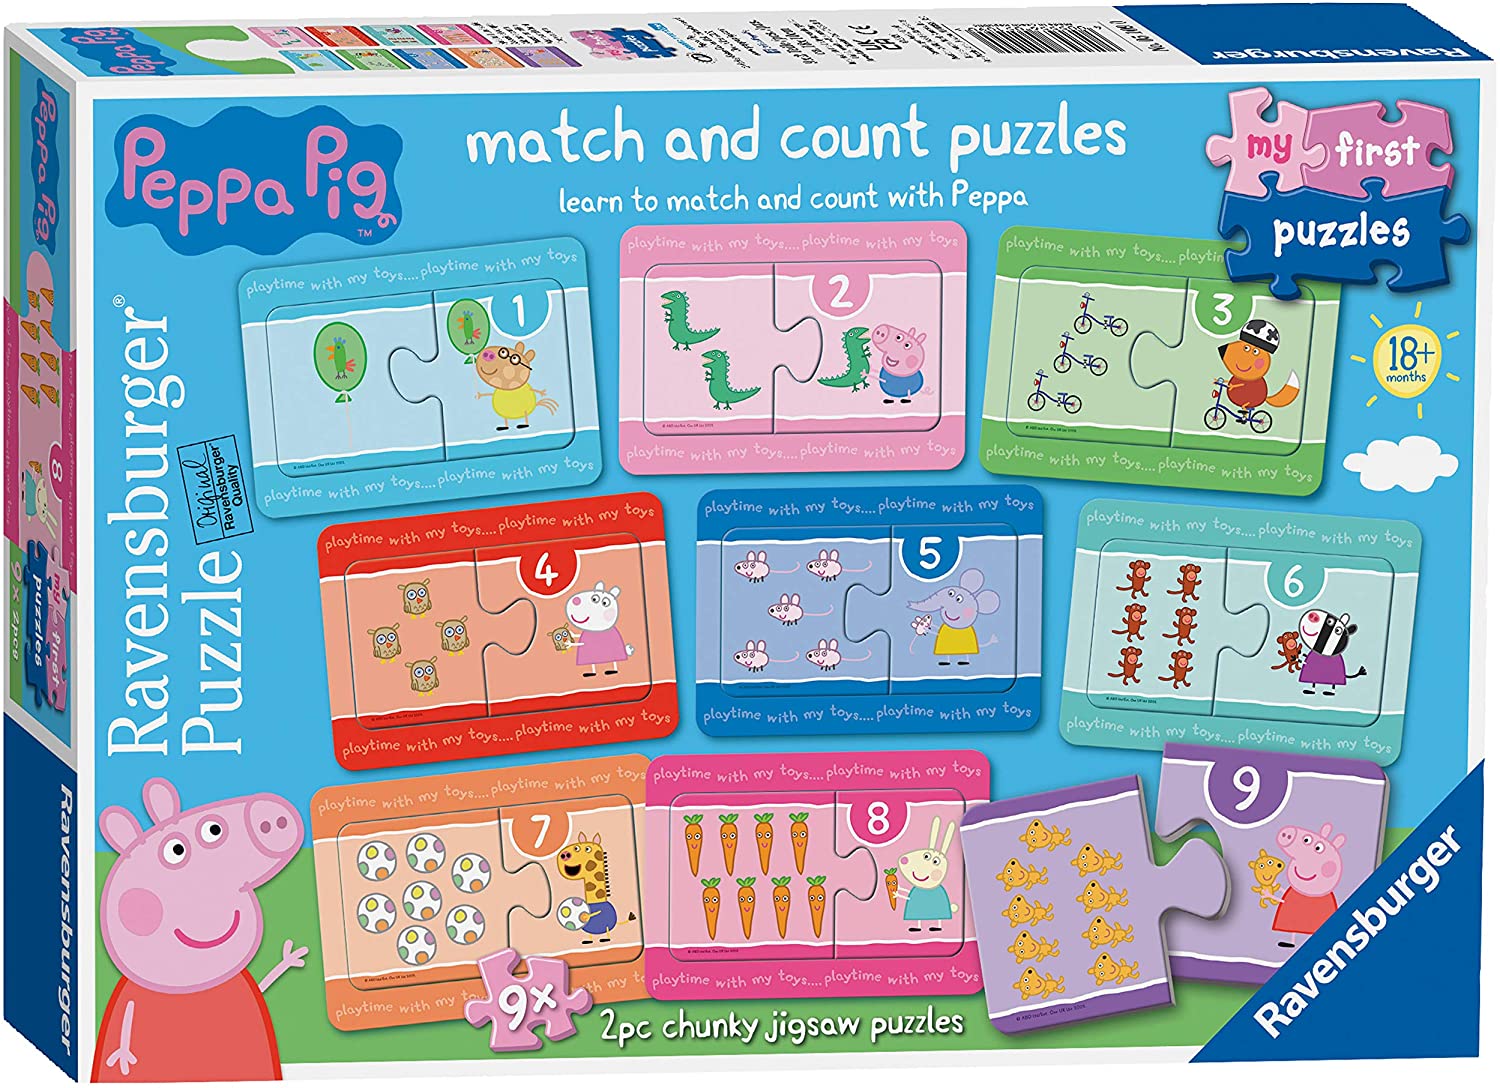 Ravensburger Peppa Pig My First Puzzle